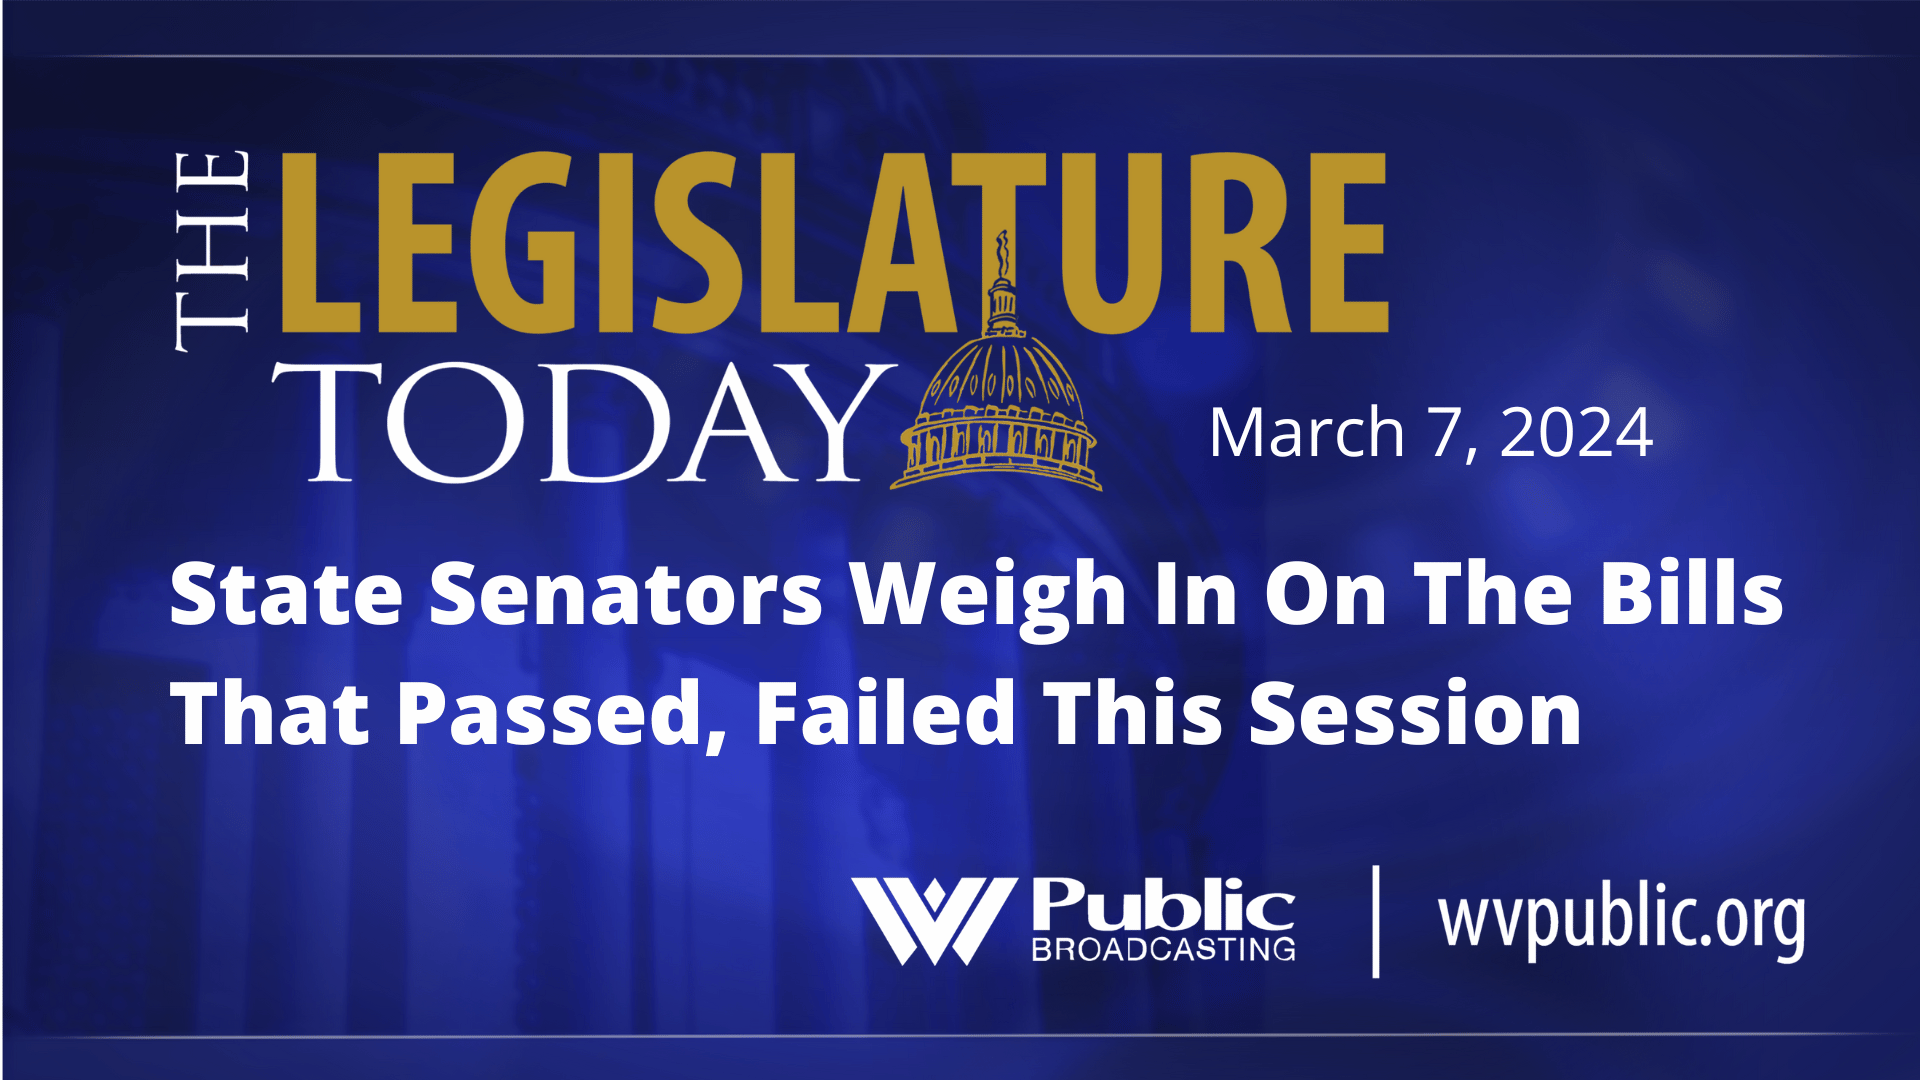 State Senators Weigh In On The Bills That Passed, Failed This Session